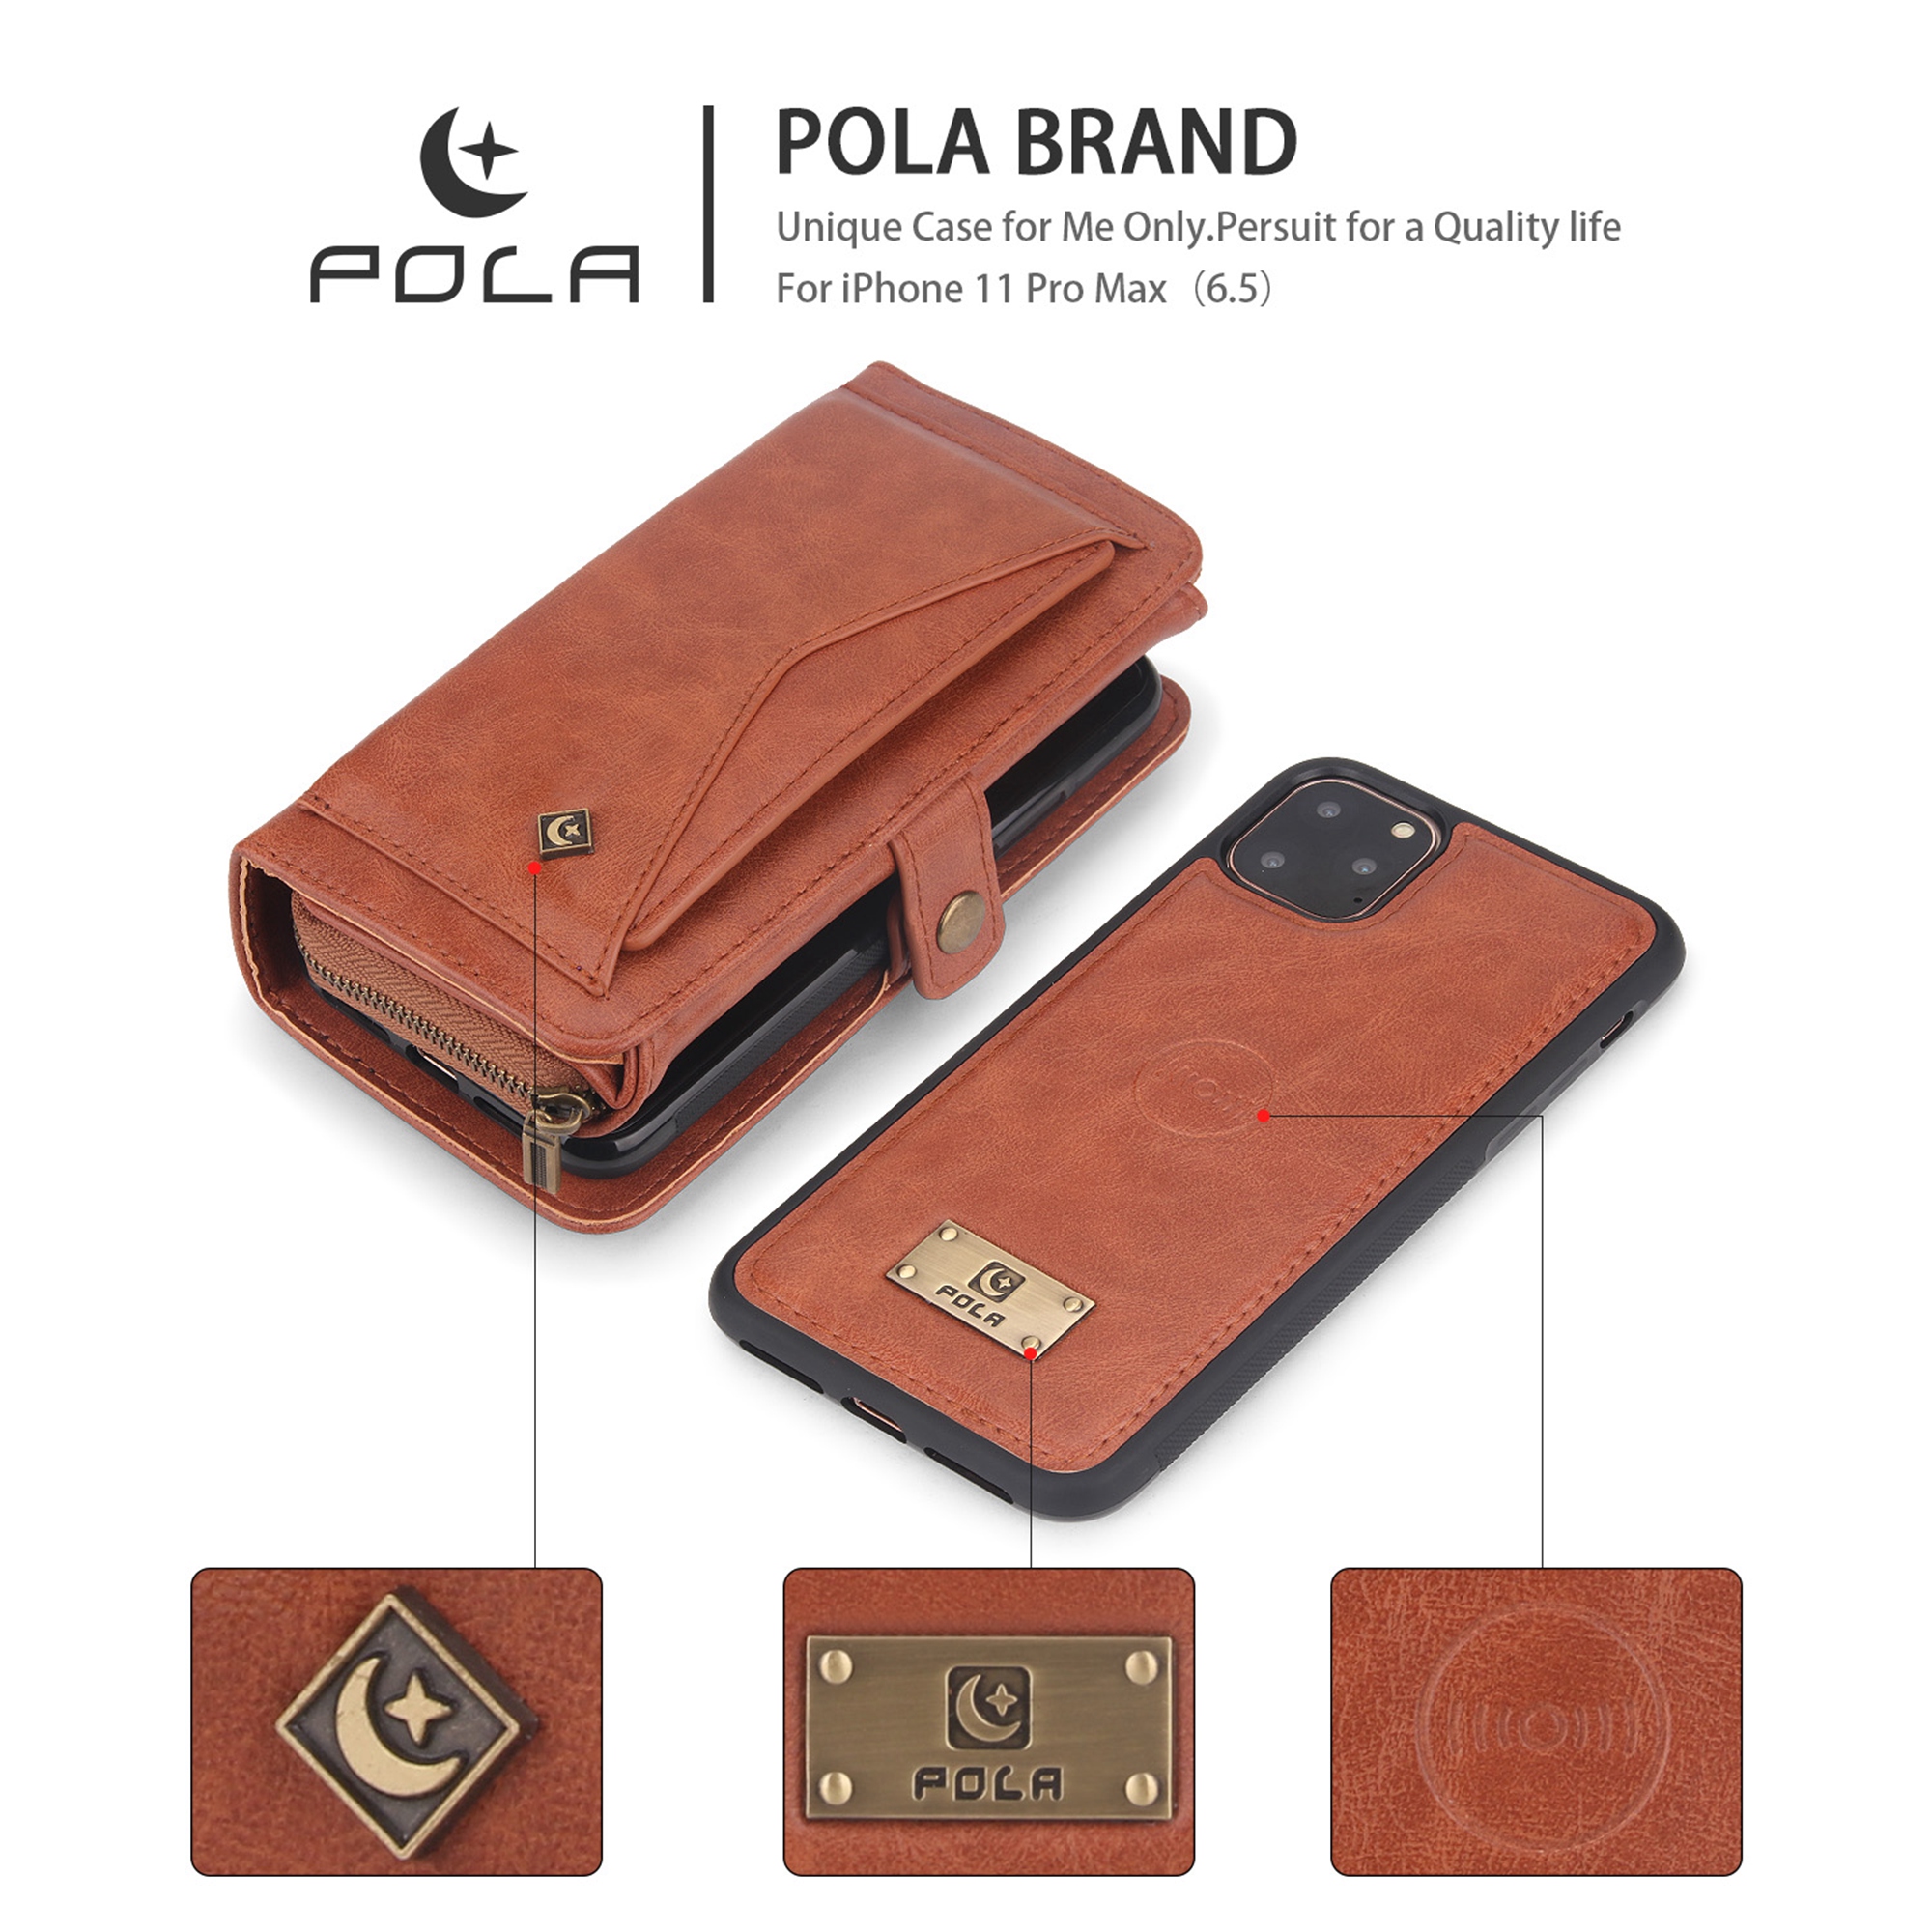 iPhone 11Pro 5.8 inch Wallet Case, Dteck 2 in 1 Leather Zipper Purse Multi-Function Tri-fold Wallet Case Detachable Magnetic Phone Cover with 14 Card Slots Money Pocket For iPhone 11 Pro,Brown - image 2 of 11